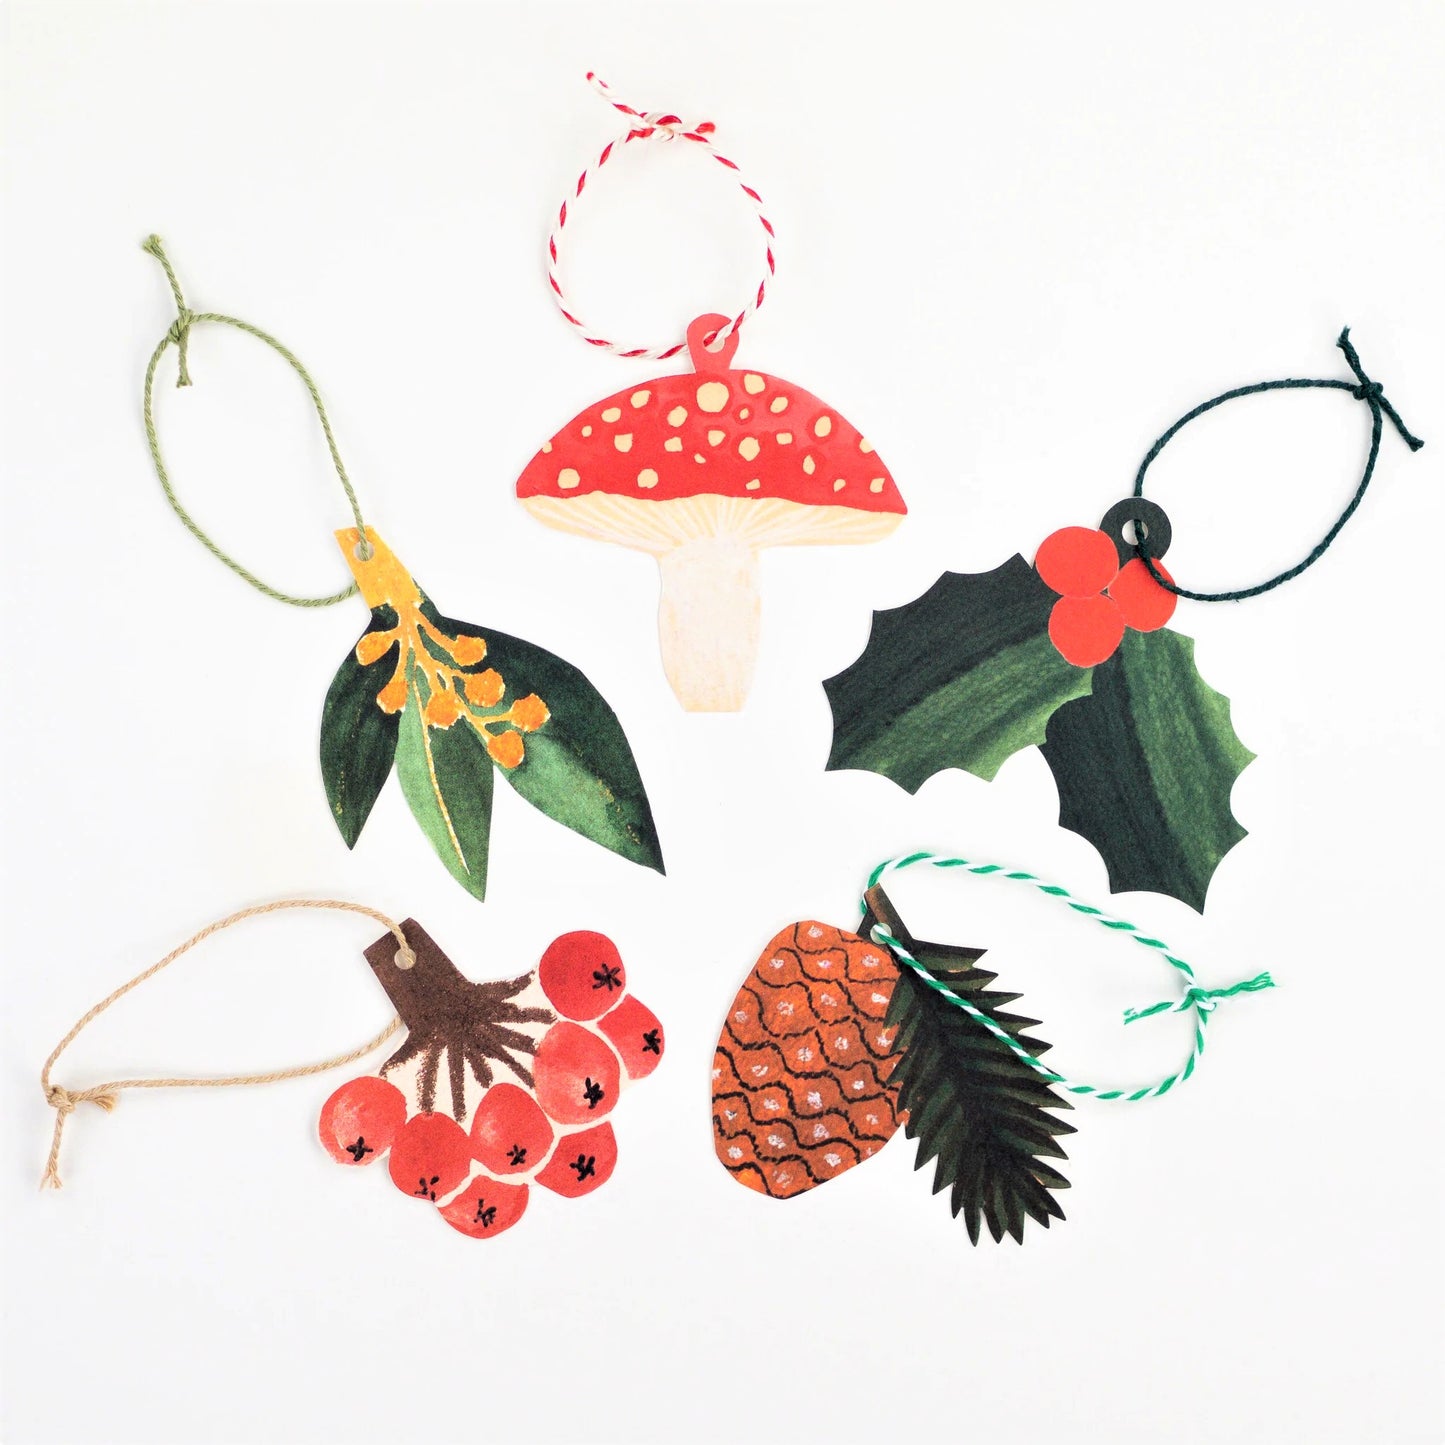 A set of five different festive plant gift tags in red, green and yellow with colourful sttring, by Hadley Paper Goods